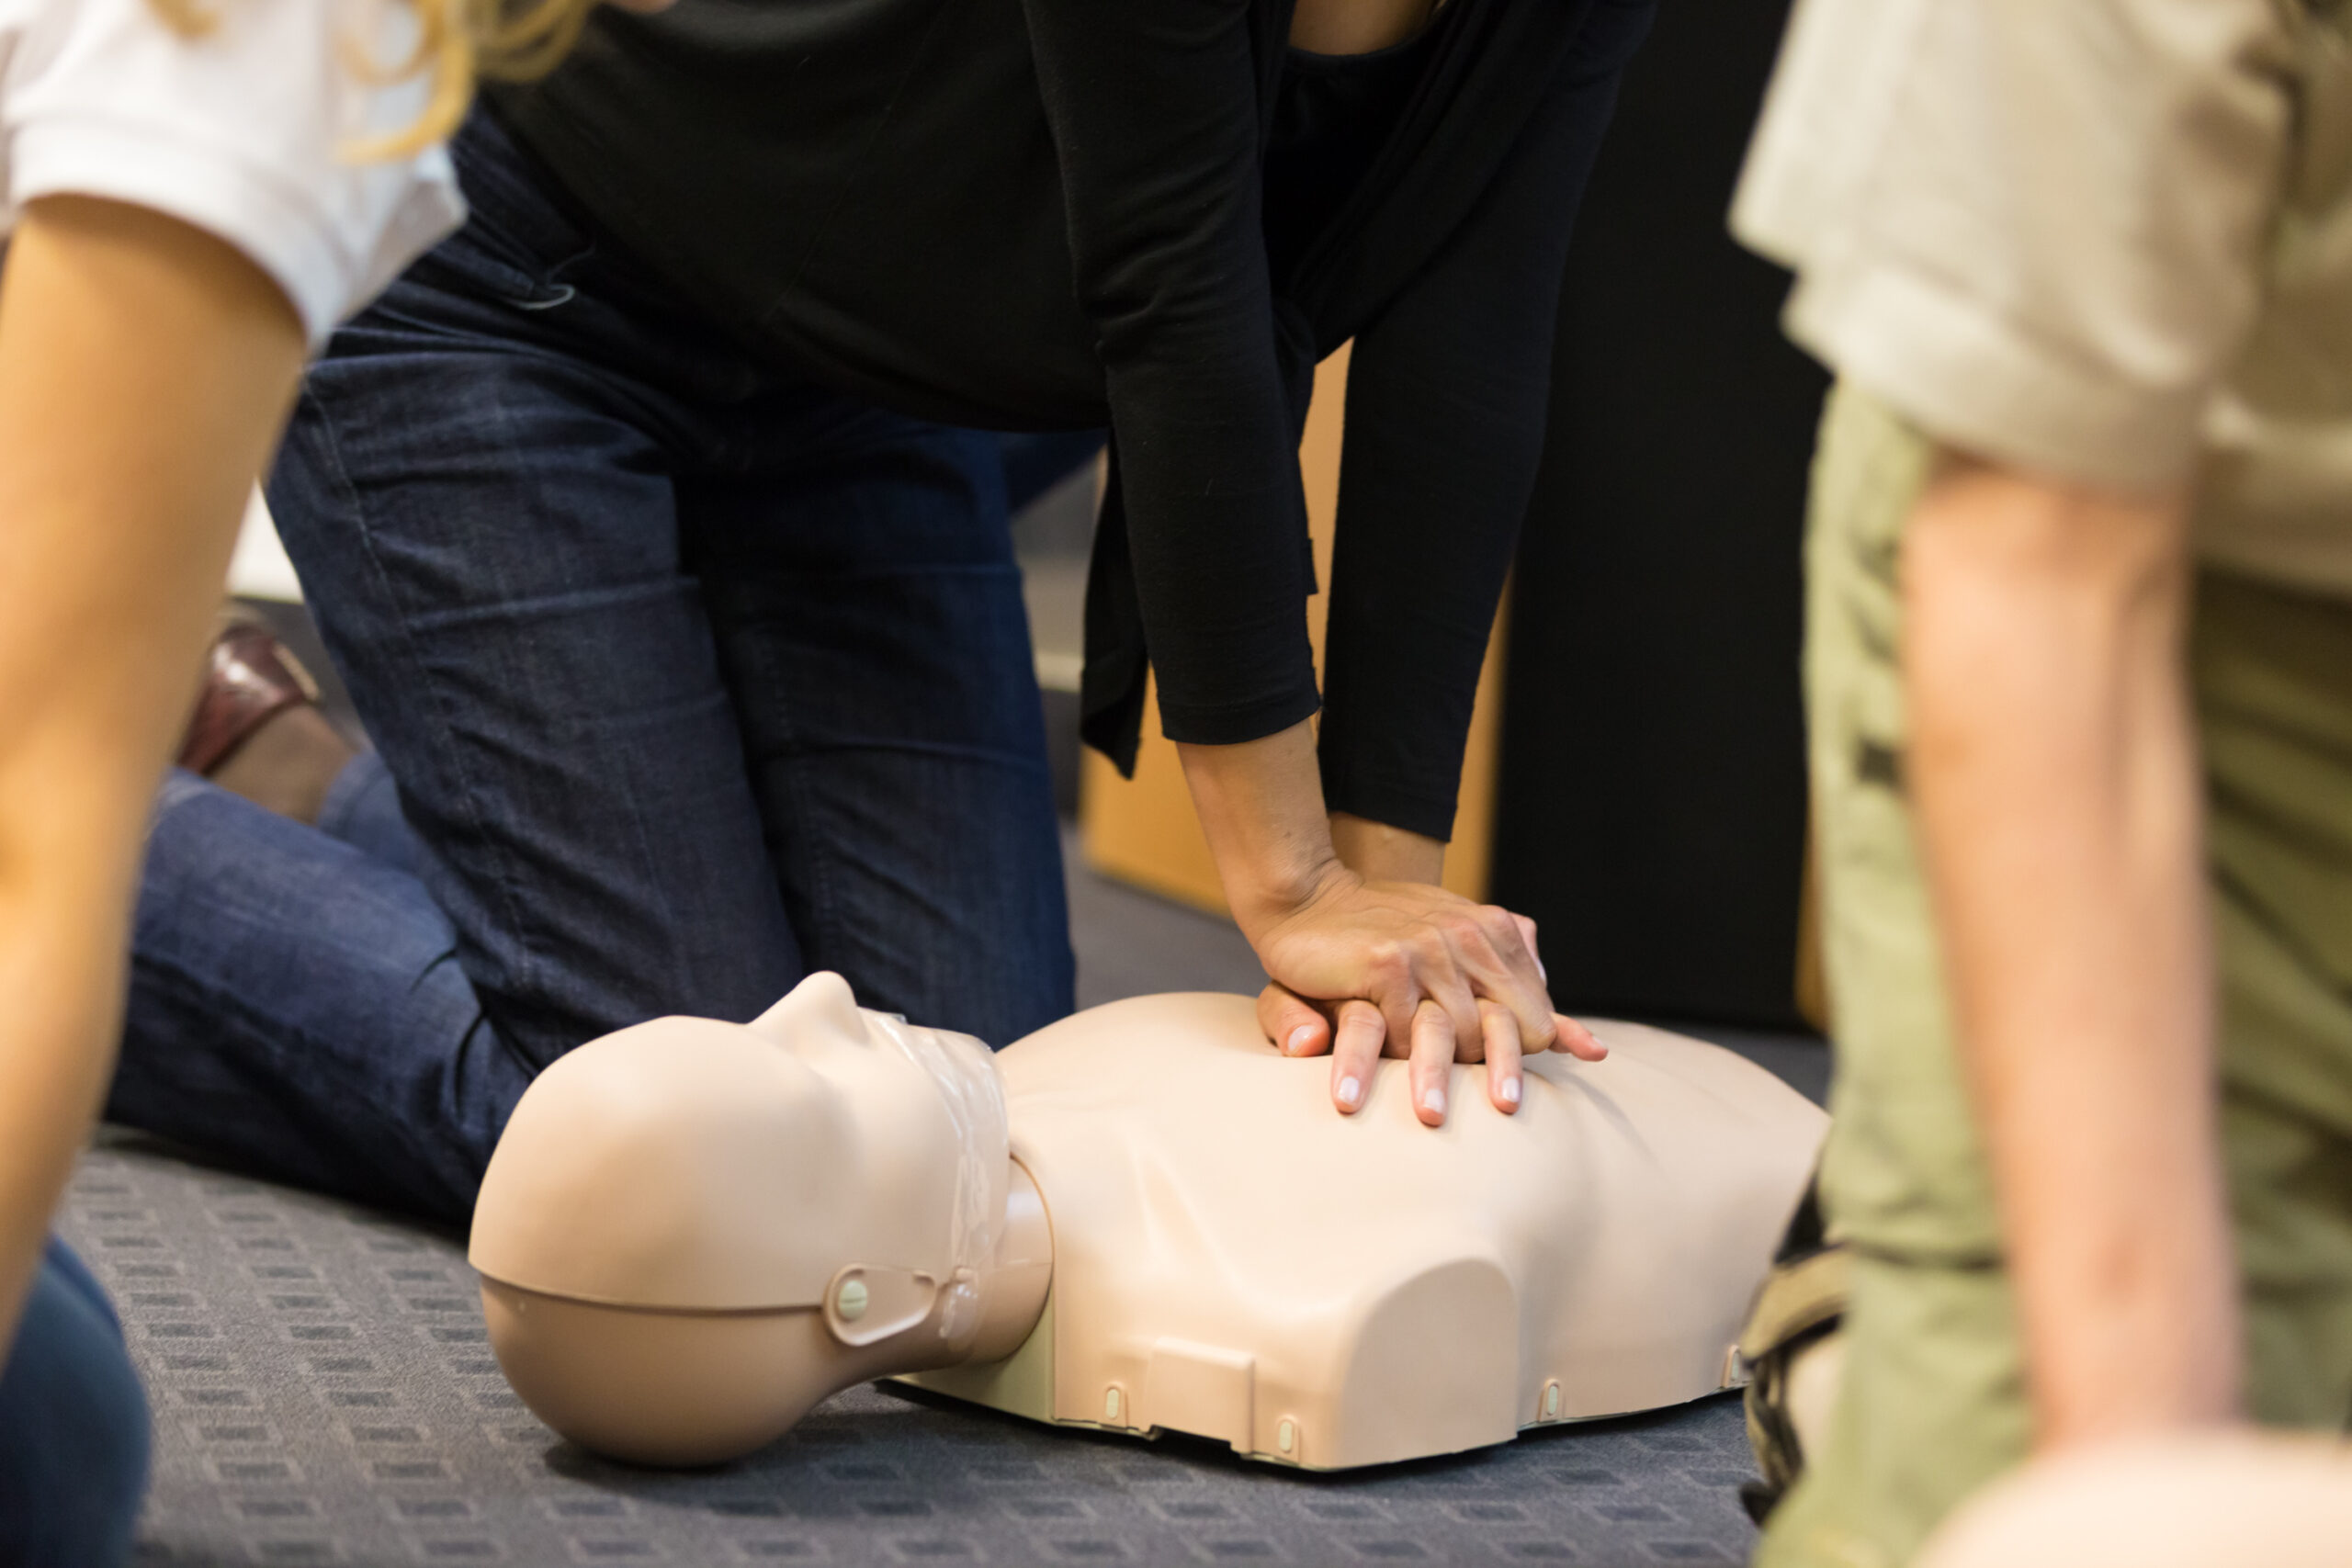 CPR & First Aid for Adults, Children and Infants